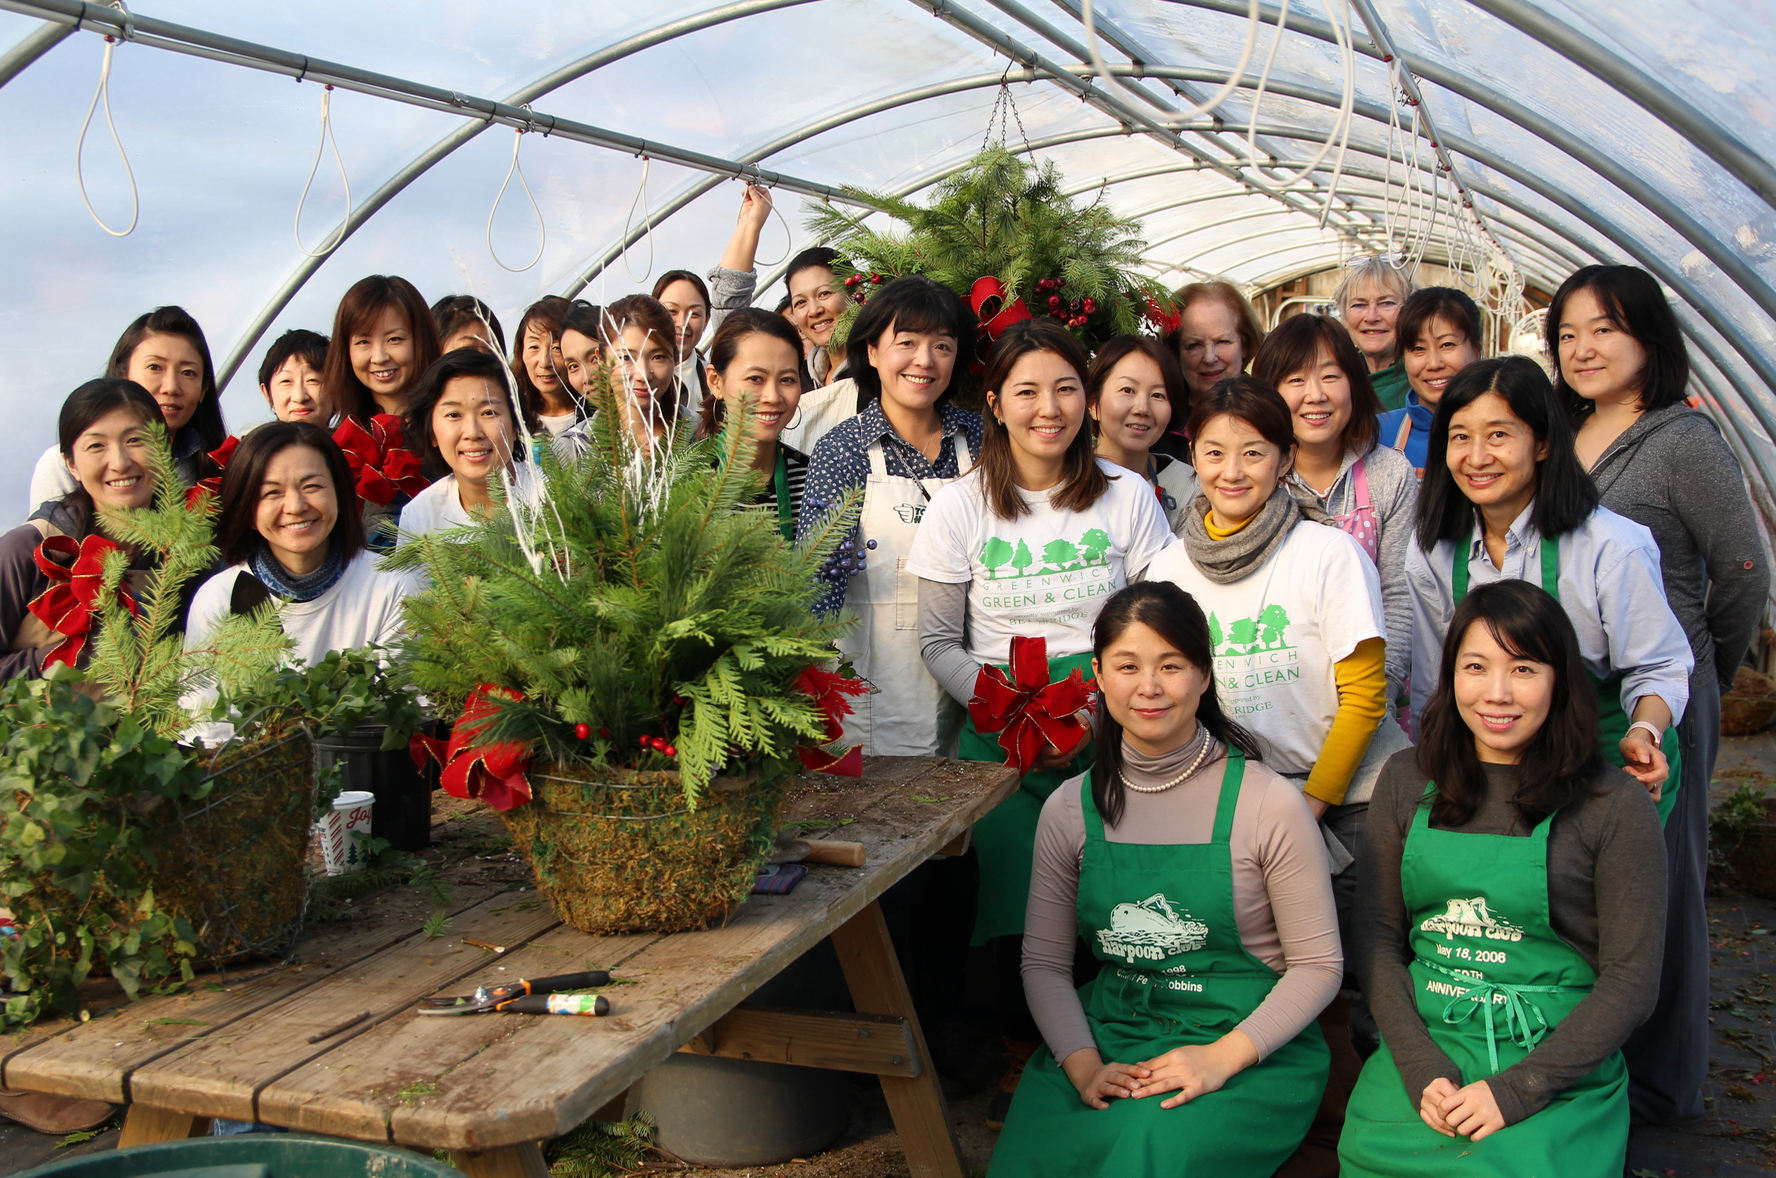 About 30 Japanese women gathered with Mary Hull and Saly Davies at Sam Bridge Nursery & Greenhouses on North Street to arrange holiday baskets of greenery. Photo: Leslie Yager